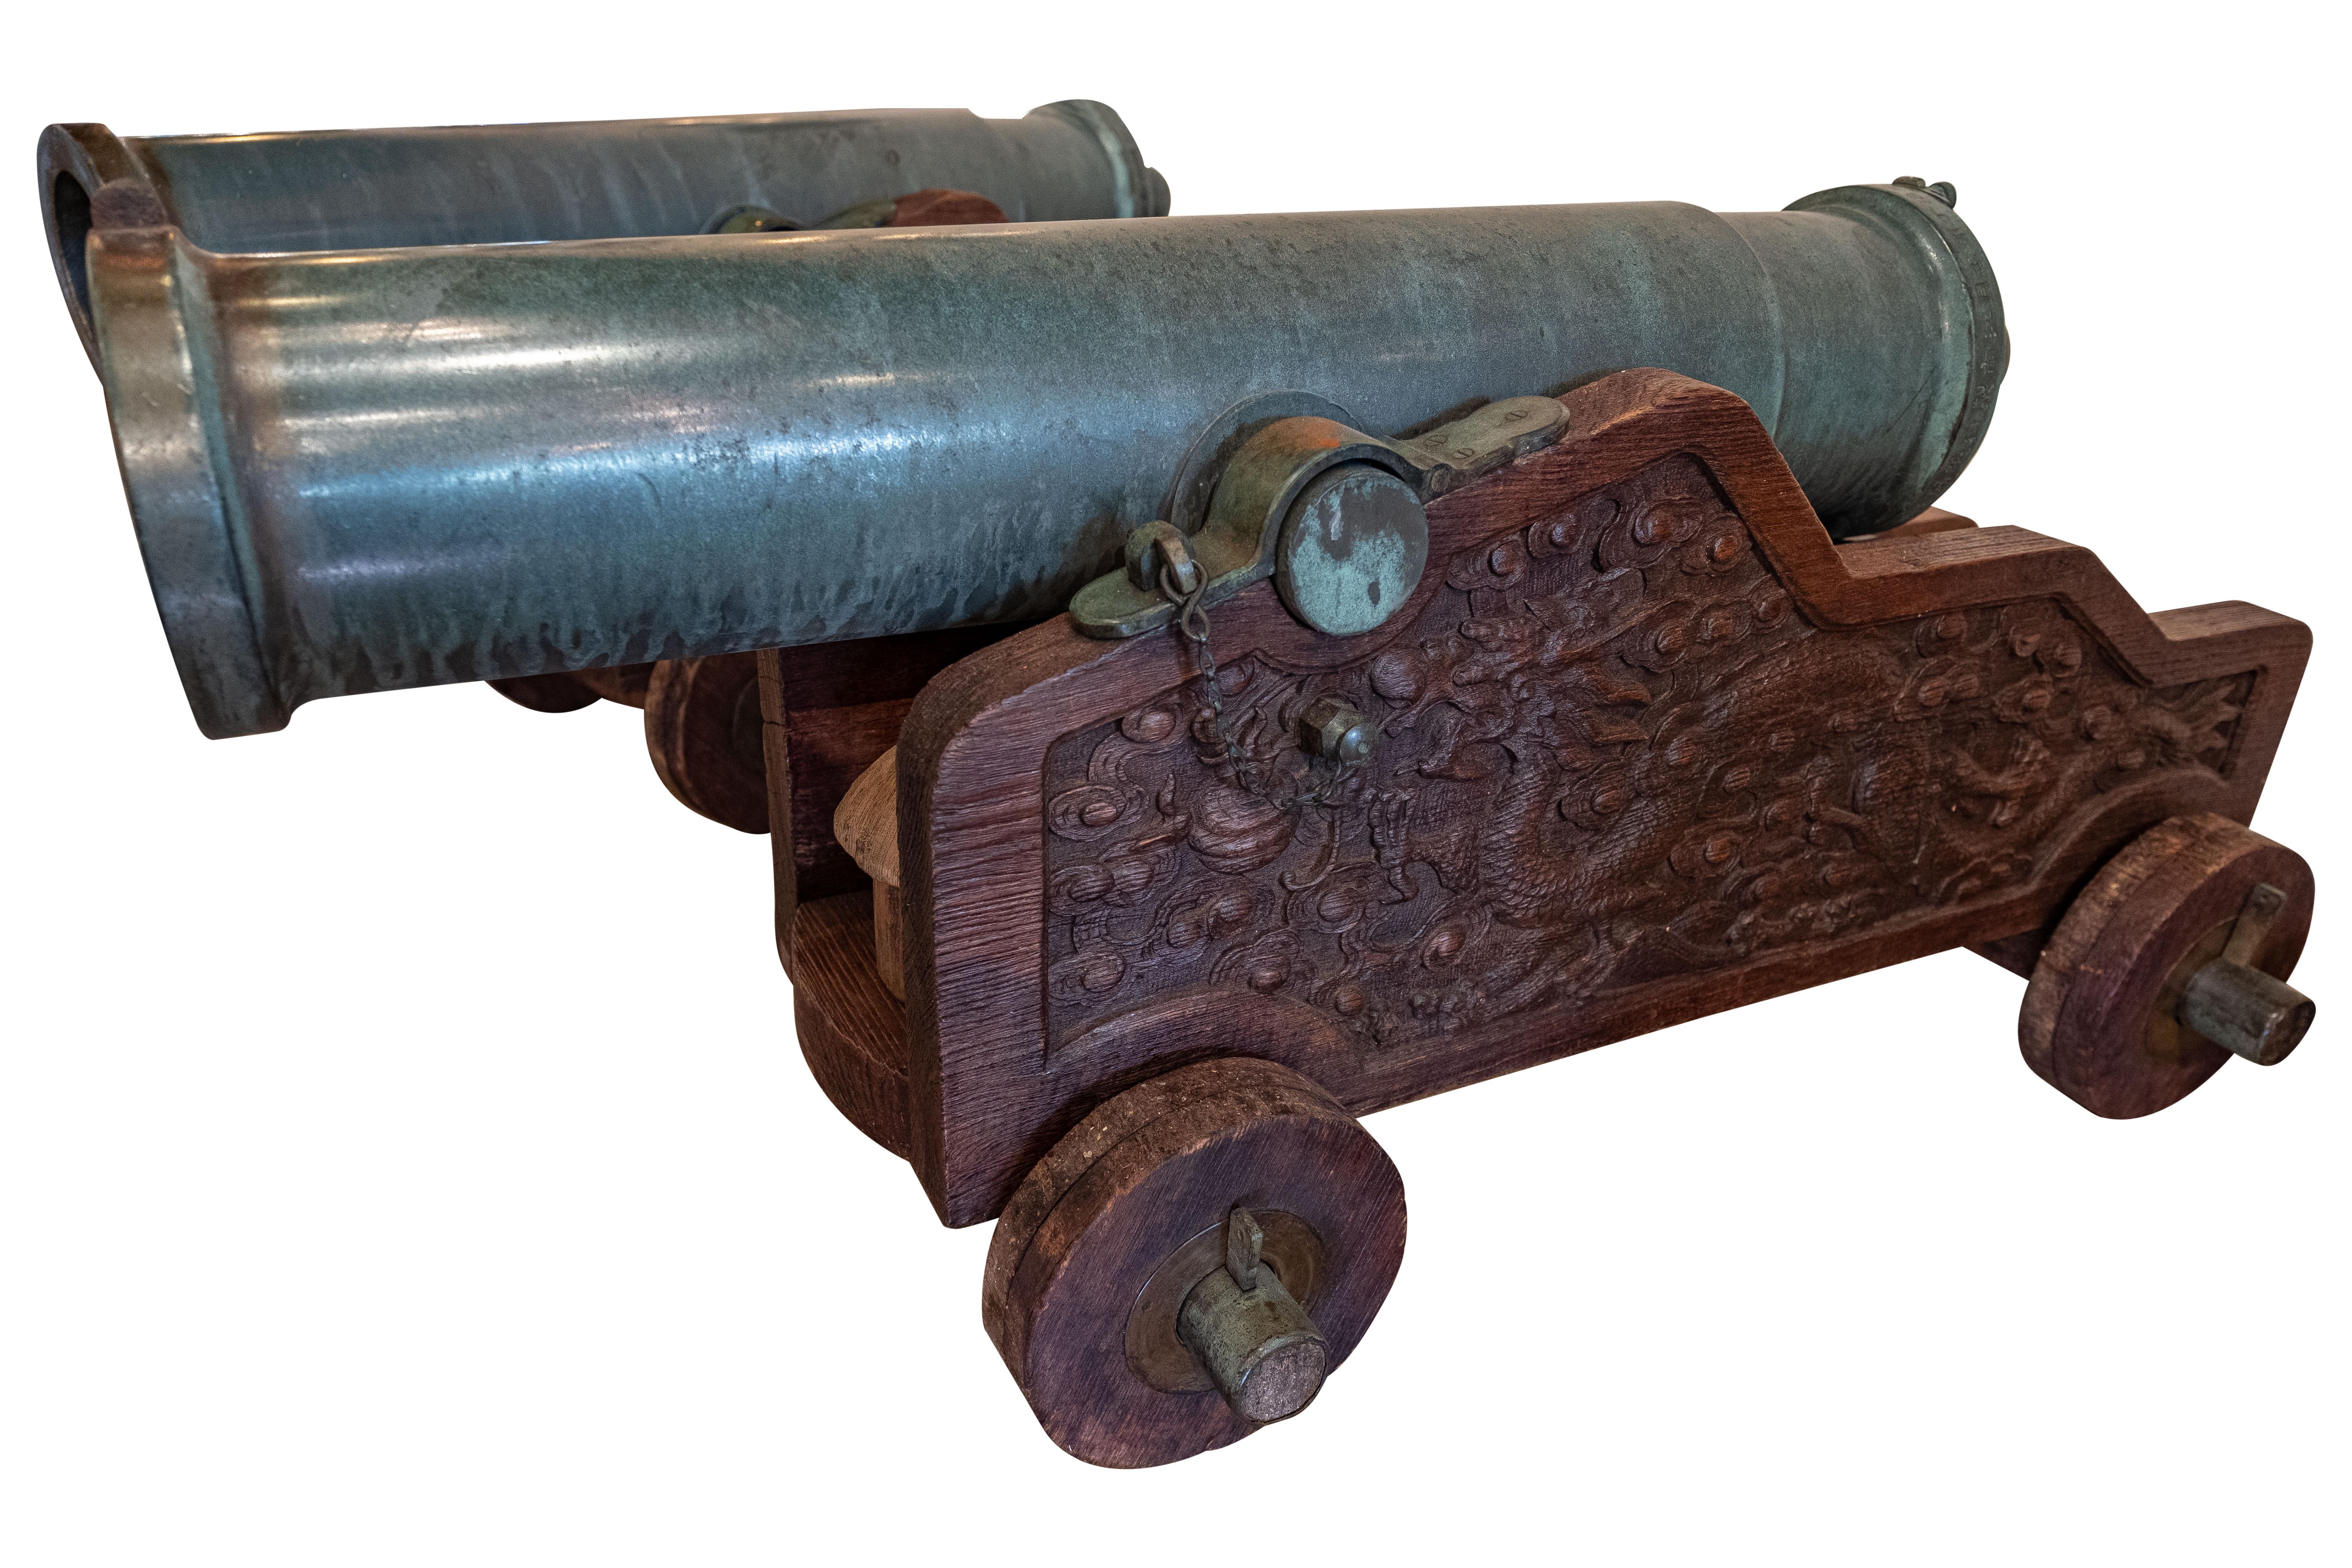 These beautiful cannons were made in 1866 and 1867 in China, and were found in the Lowther castle in Cumbria, seat of the Earls of Lonsdale. They each have a non-tapering tubular construction, with a prominent raised muzzle-tin carrying the